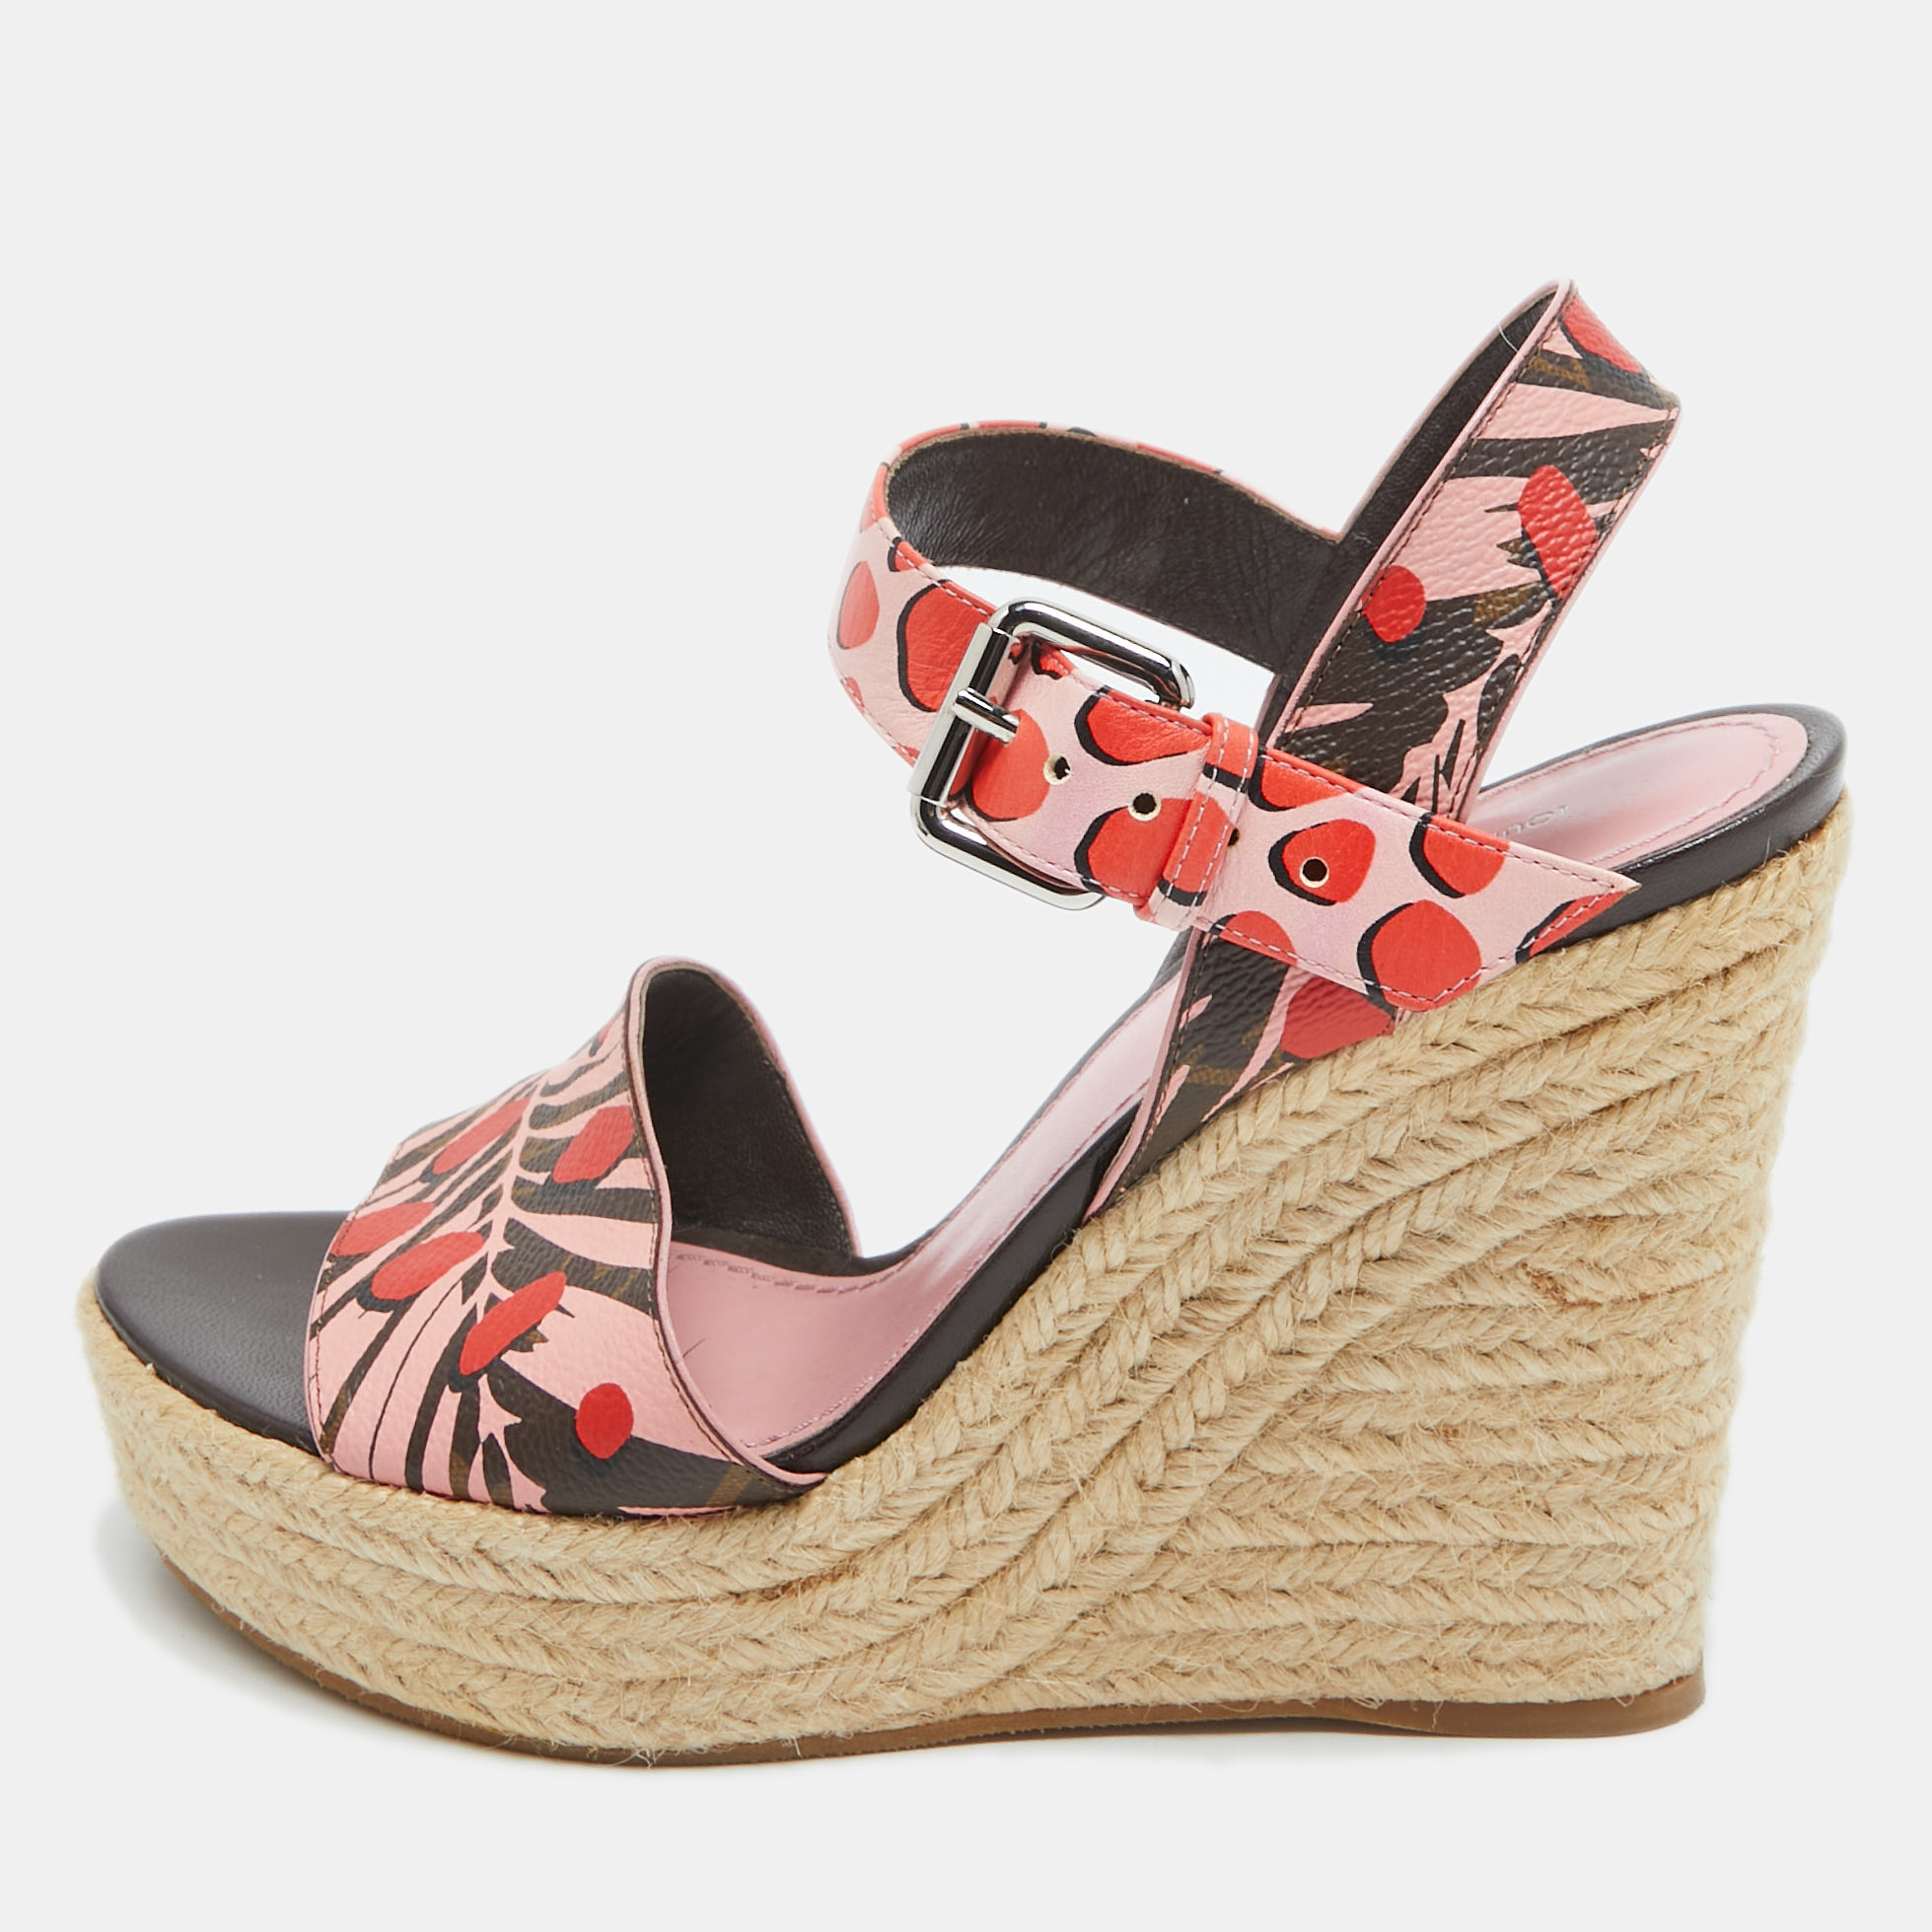 Pre-owned Louis Vuitton Tricolor Printed Monogram Canvas Sugar Pink Poppy Espadrille Wedge Sandals Size 37